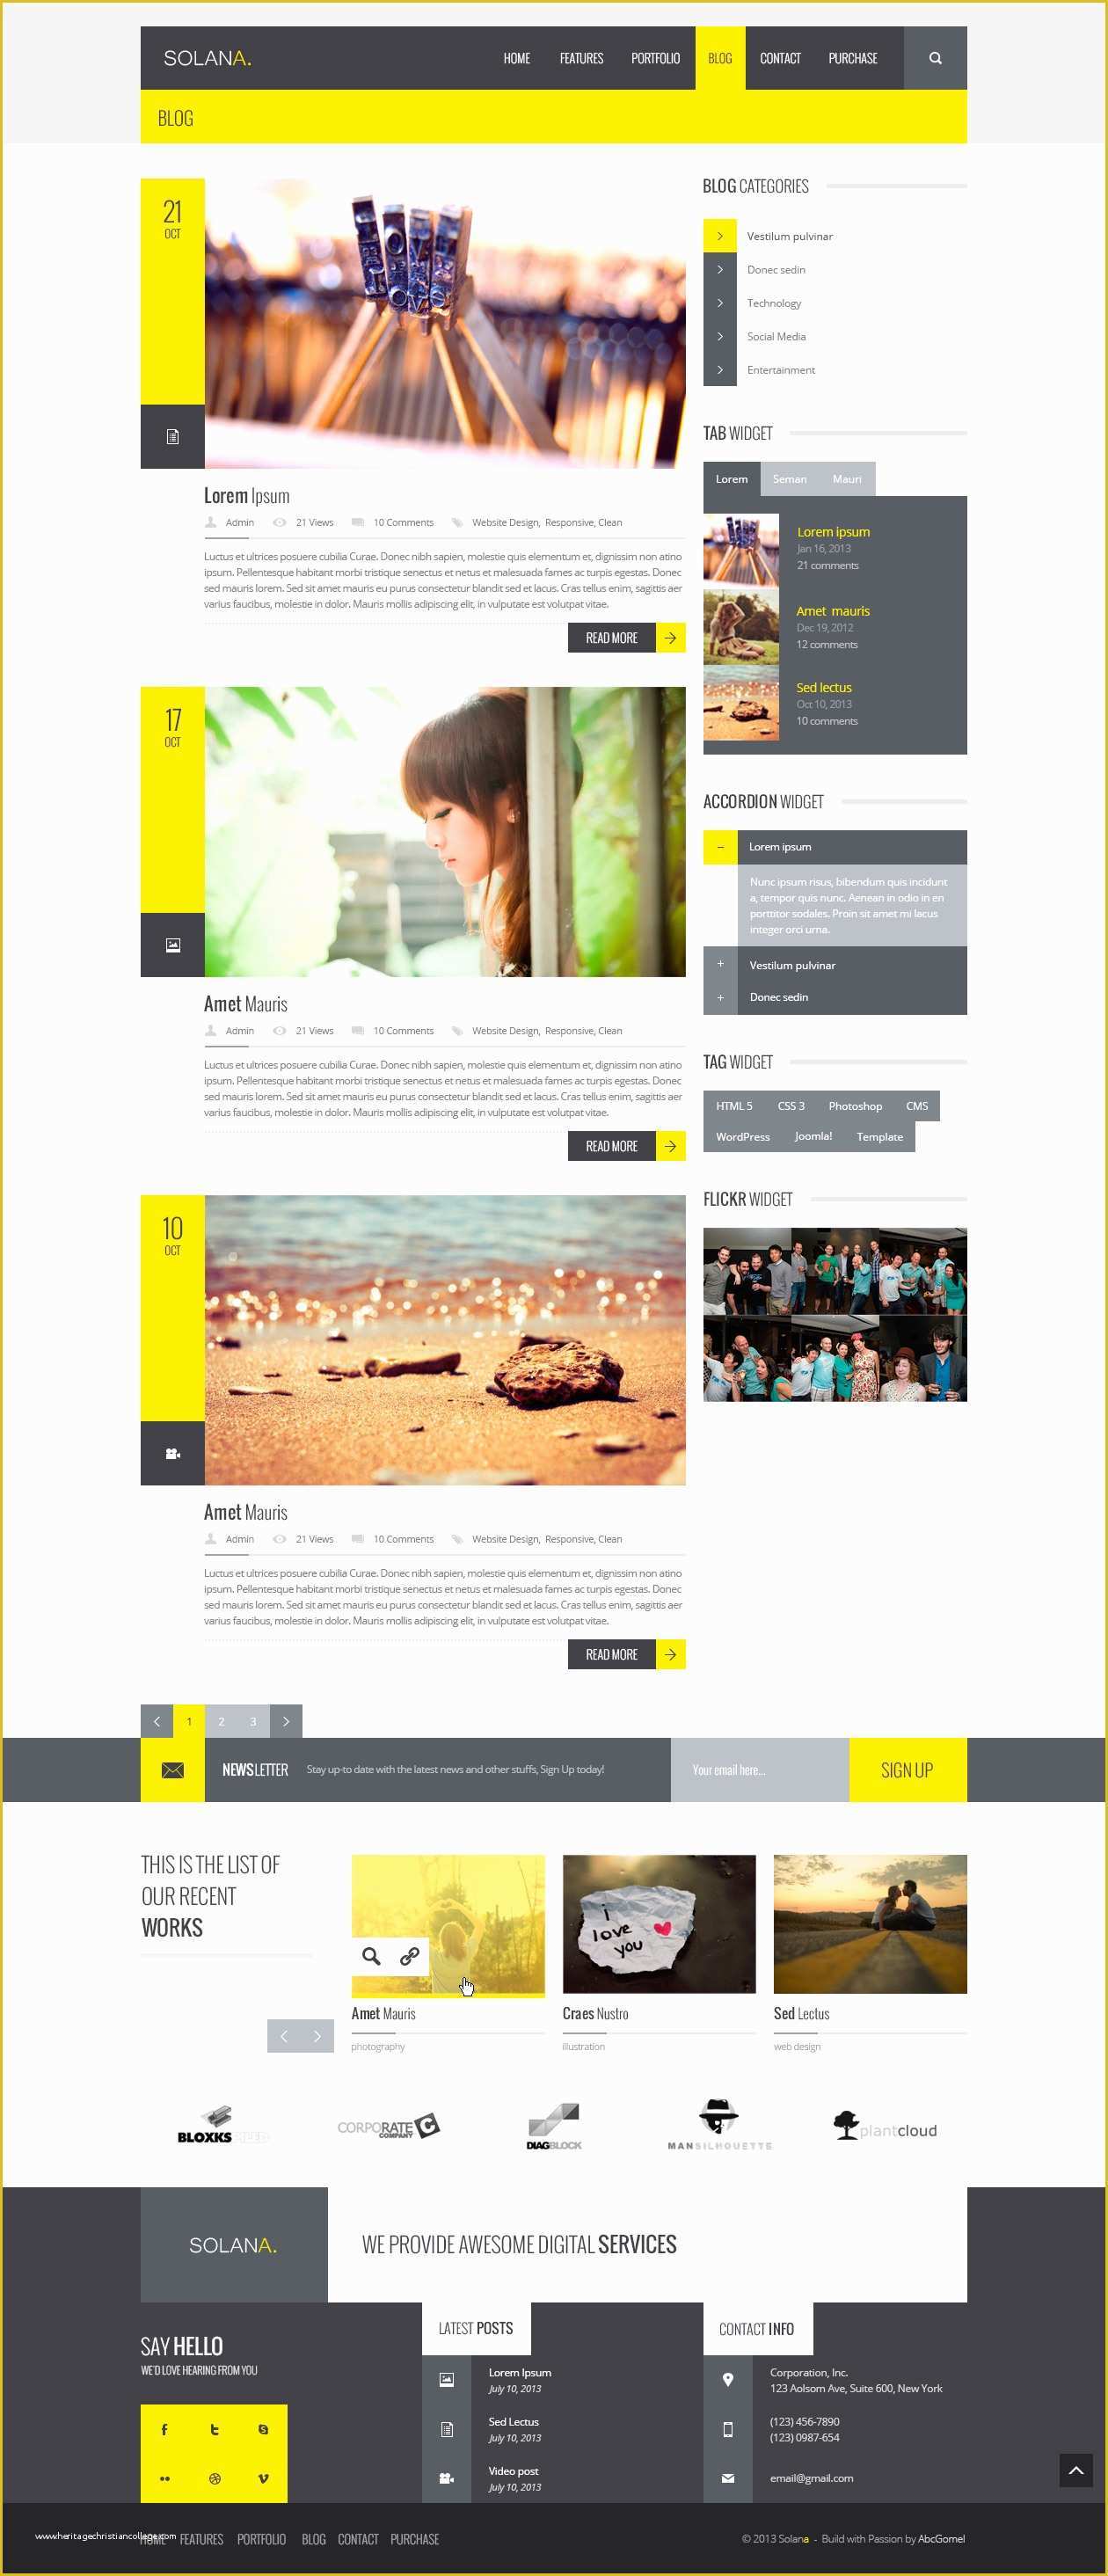 Html5 Blog Template Free Of solana Responsive HTML5 Template by Abcgomel